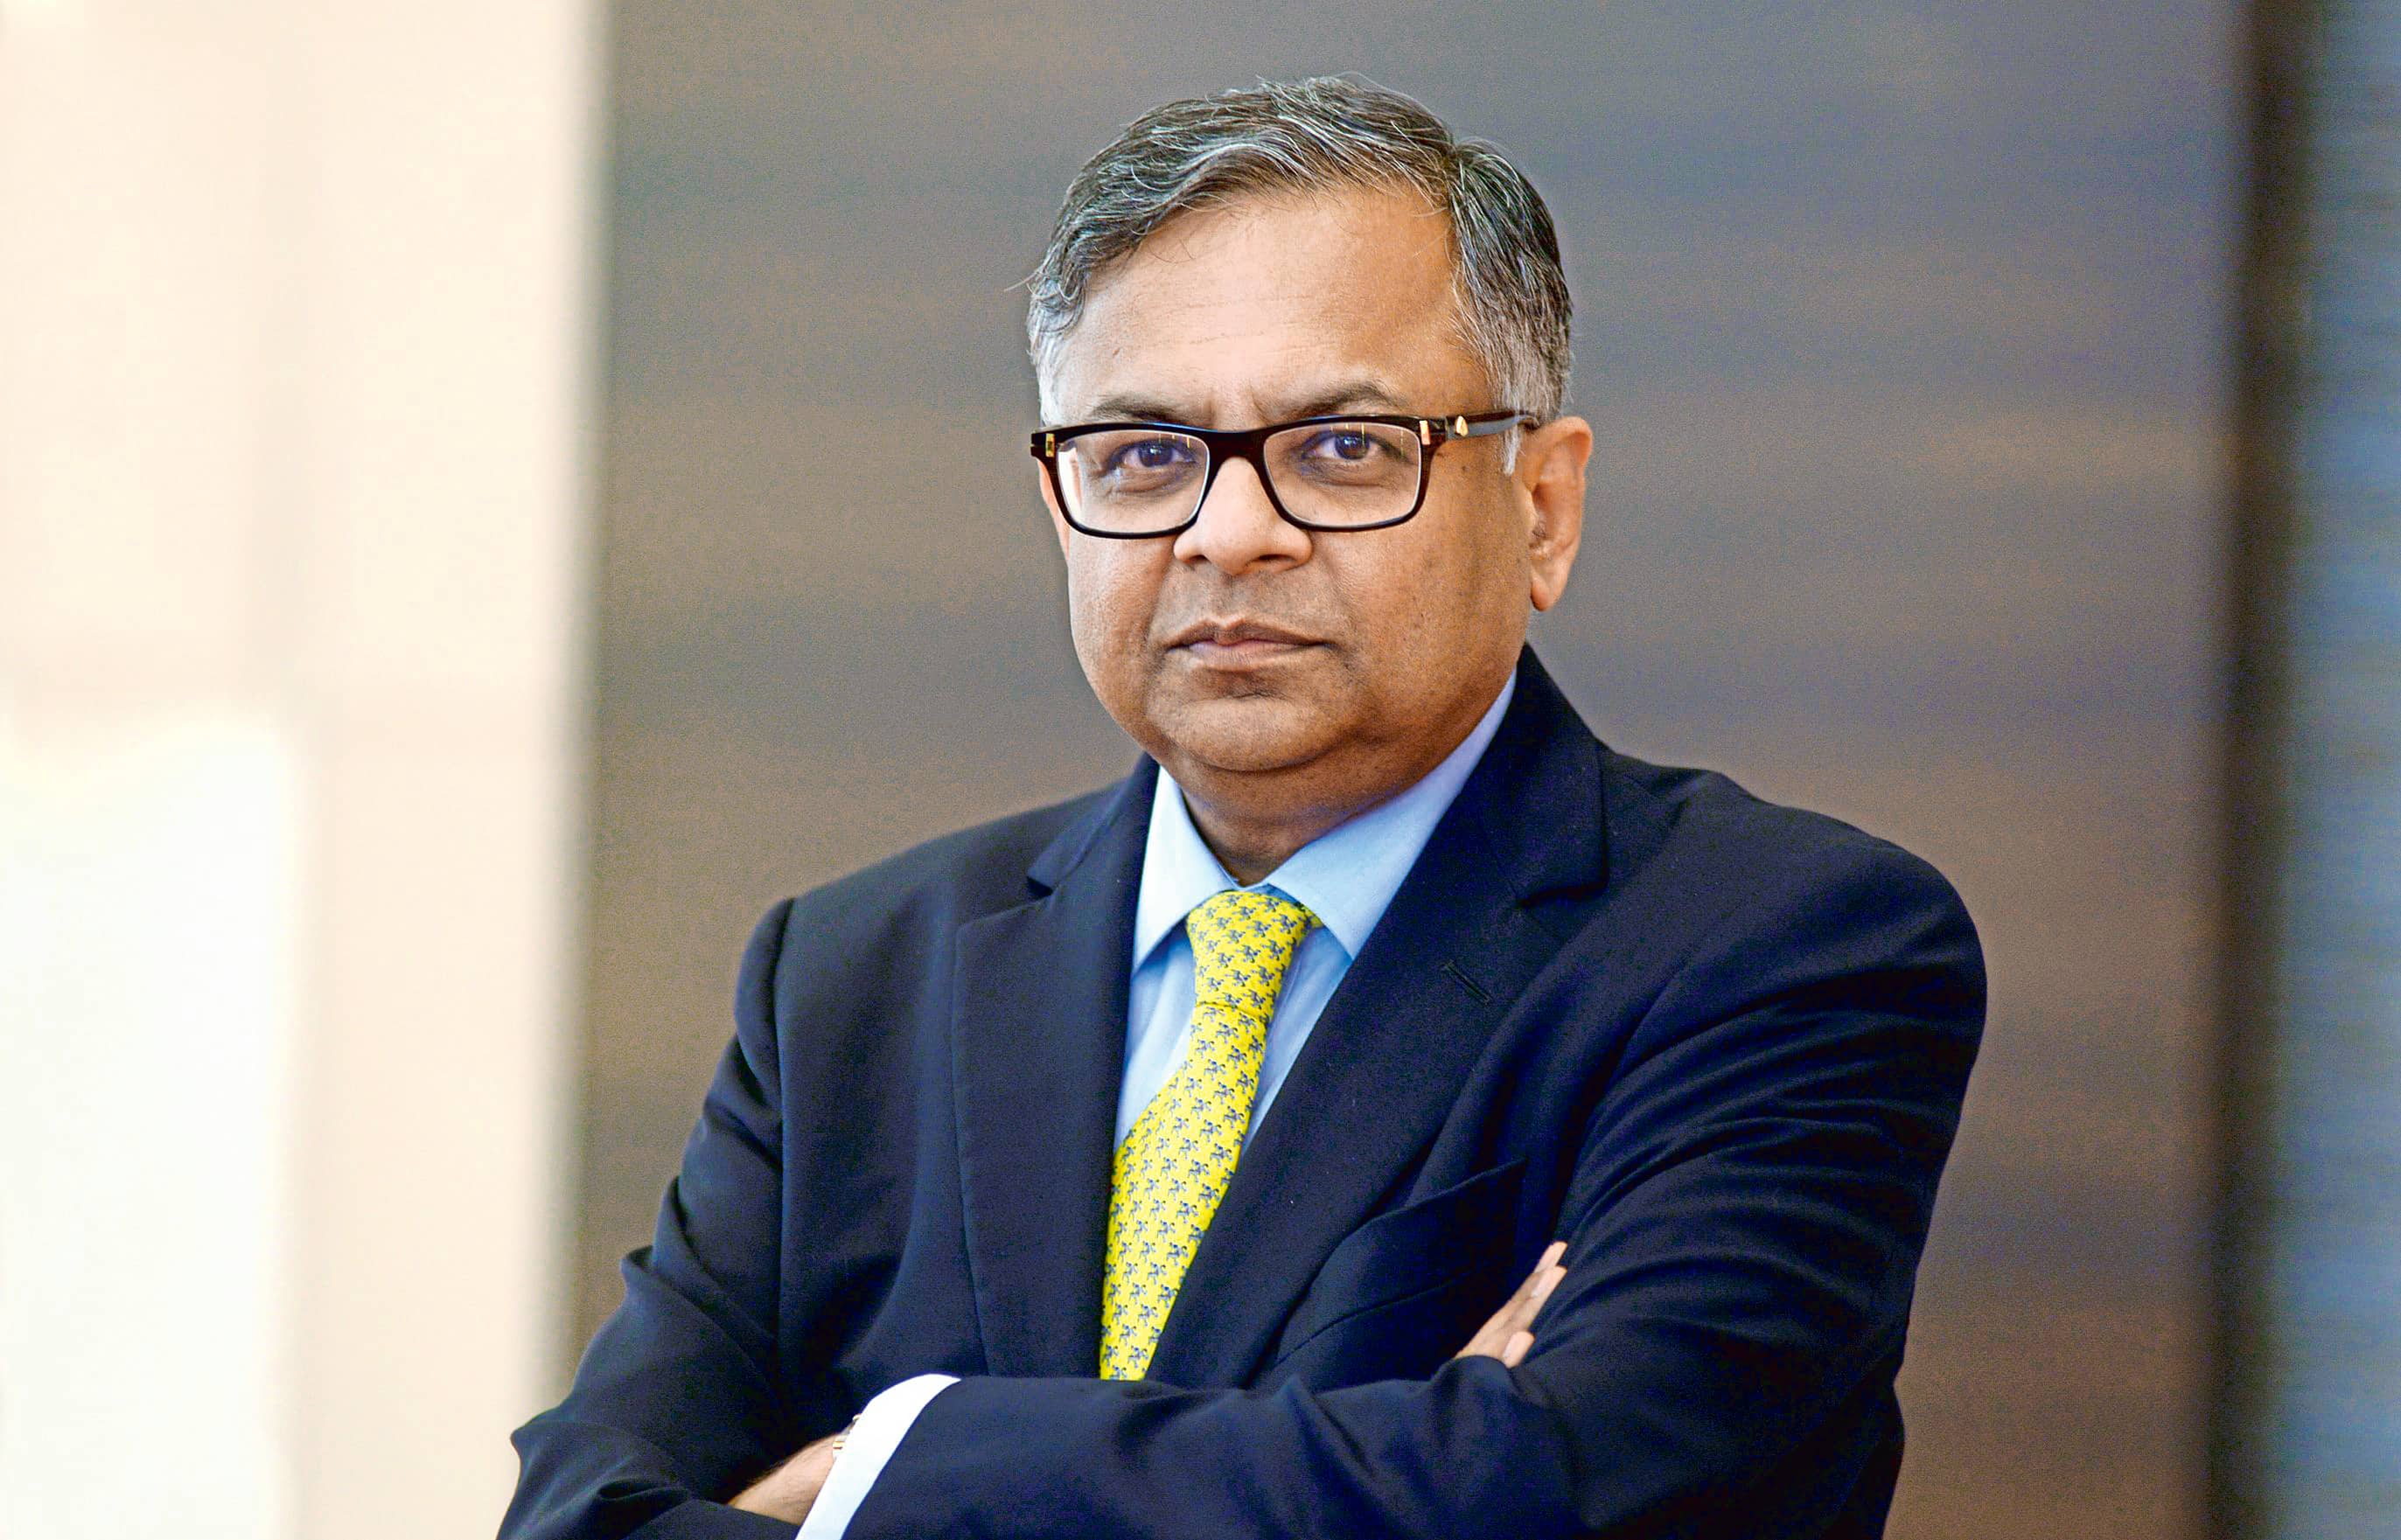 N. Chandrasekaran was in his 40s when he took over as the CEO of TCS. (Photo: Mint)